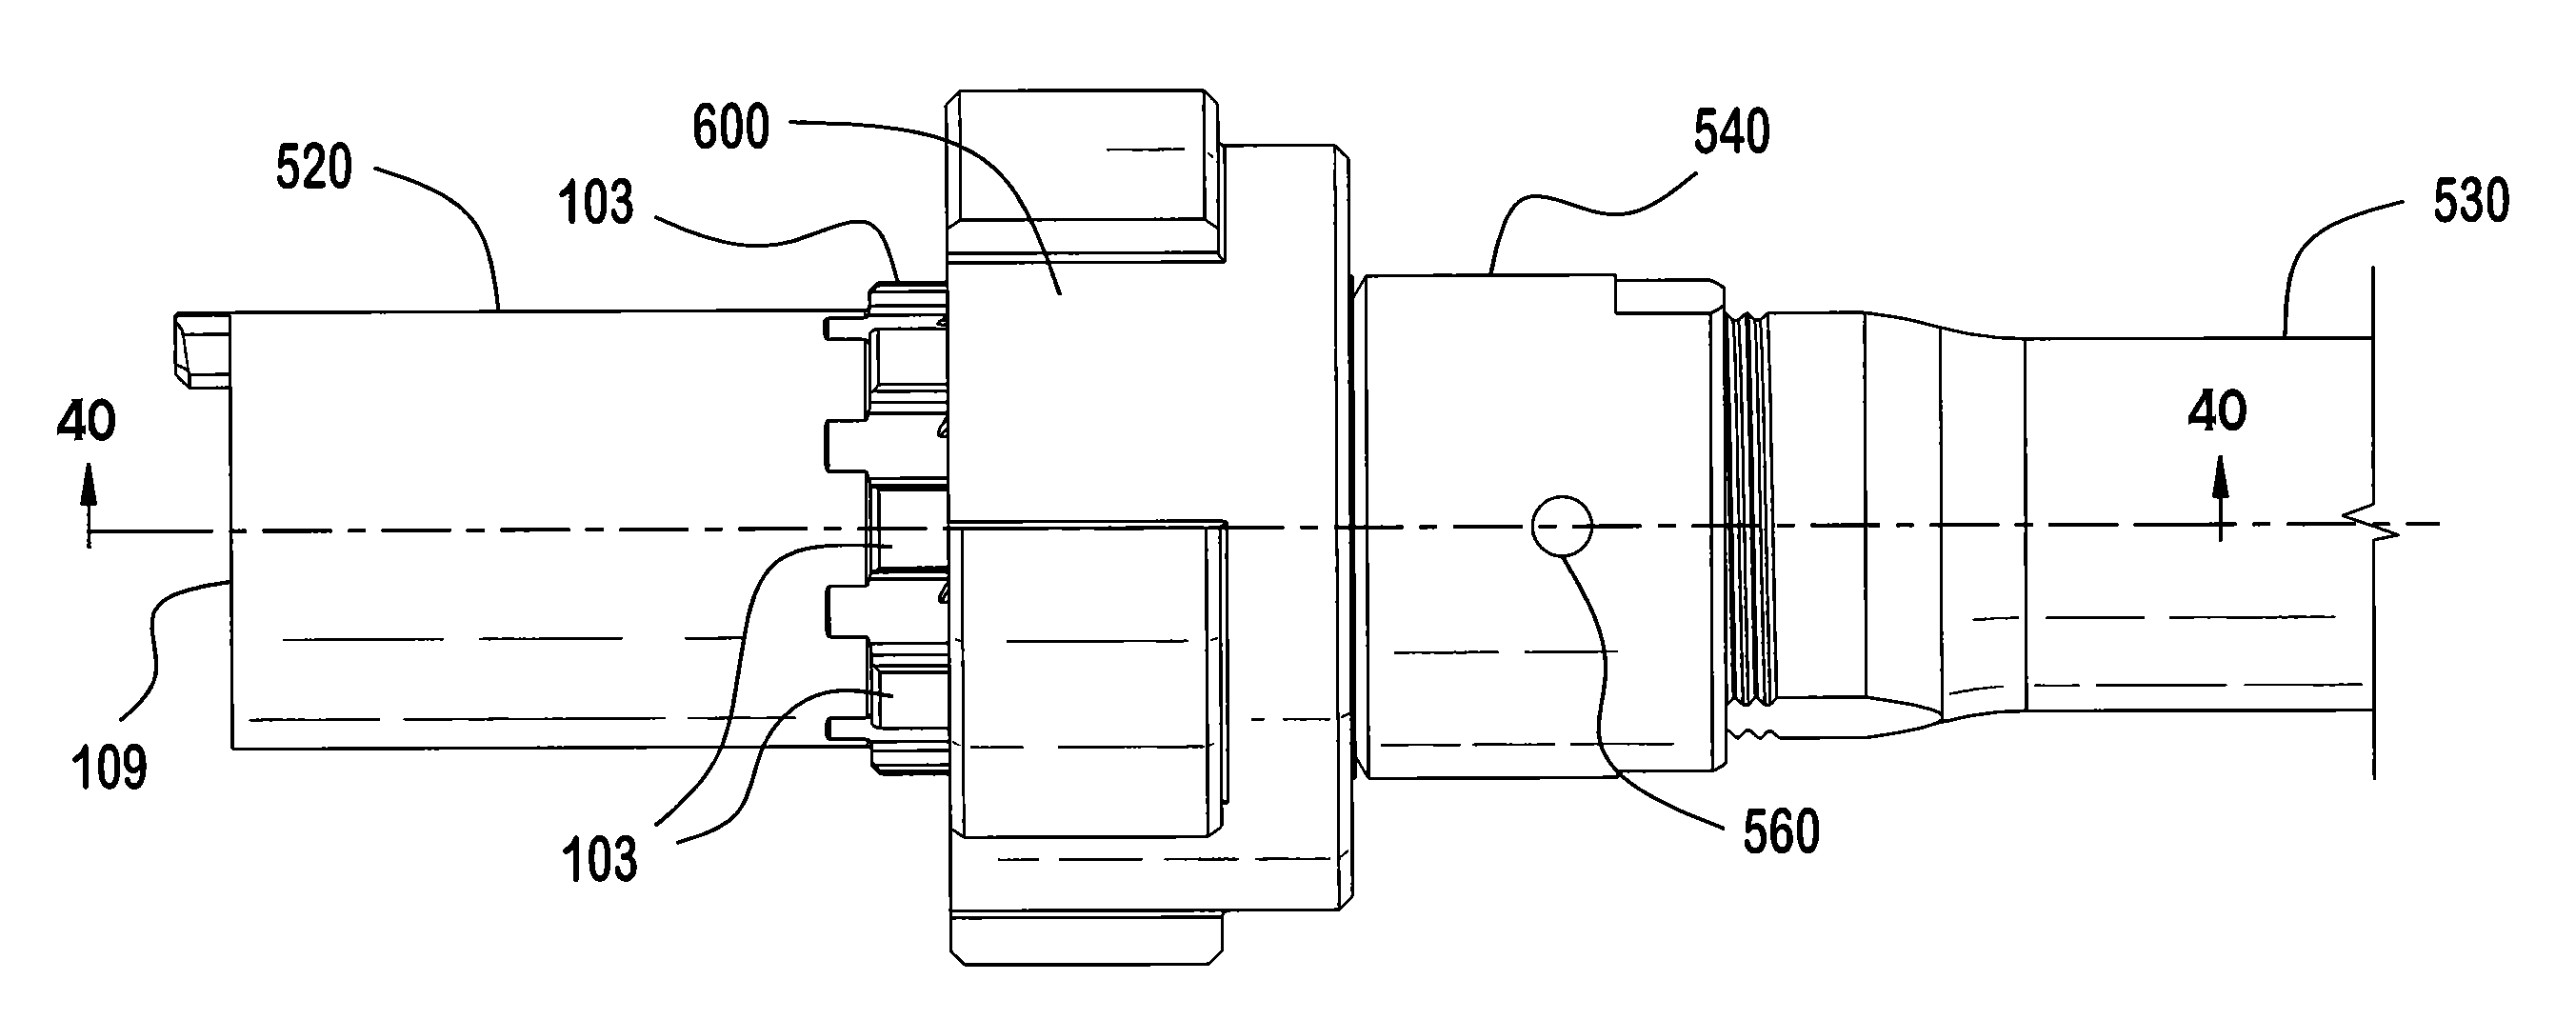 Firearm with quick coupling barrel system